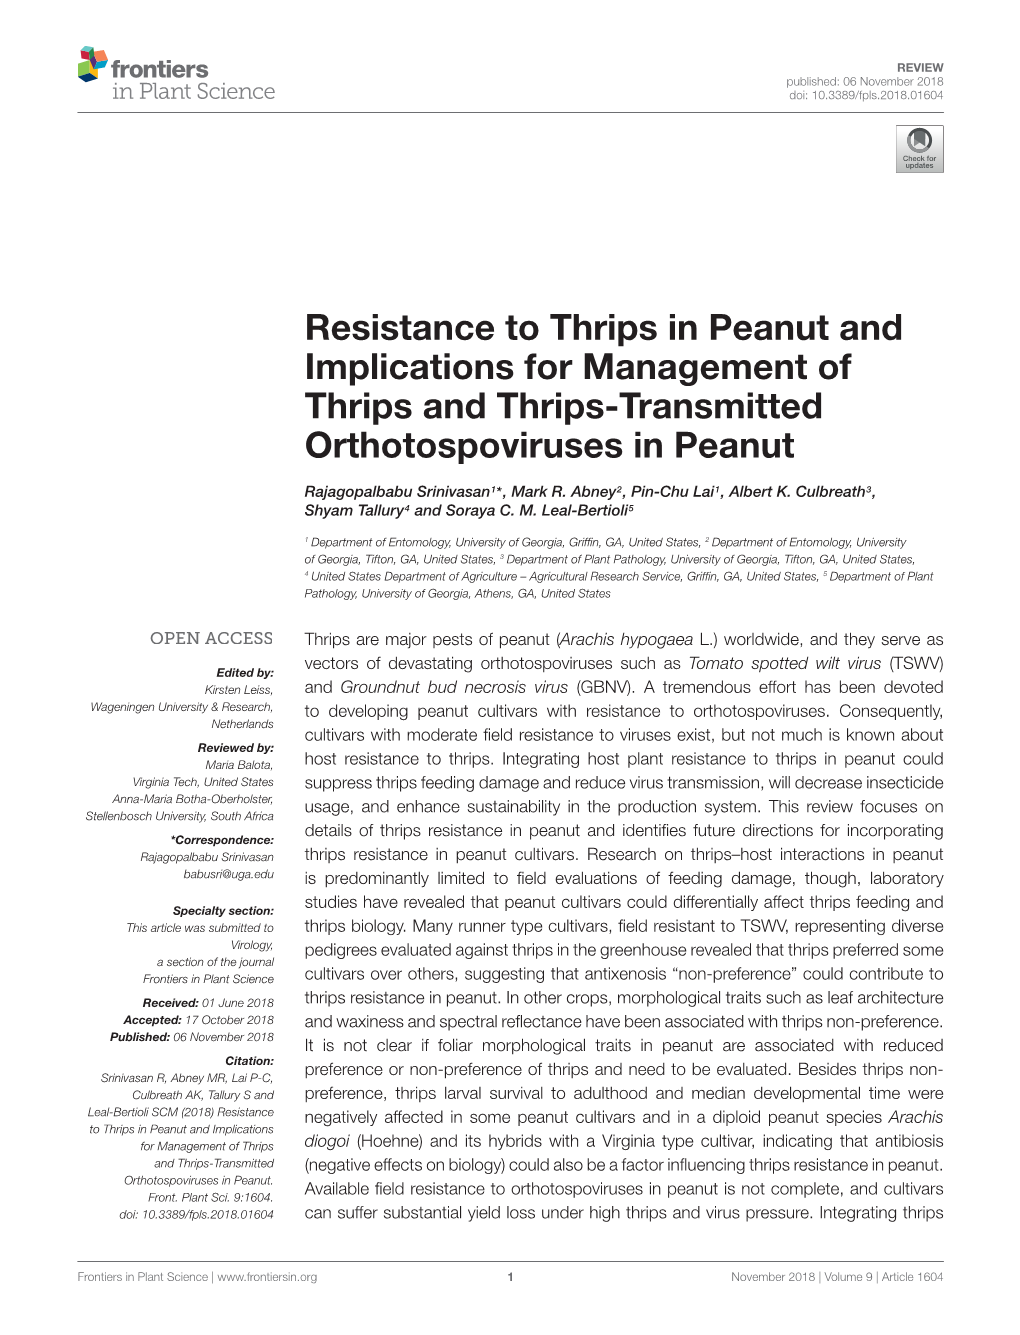 Resistance to Thrips in Peanut and Implications for Management of Thrips and Thrips-Transmitted Orthotospoviruses in Peanut